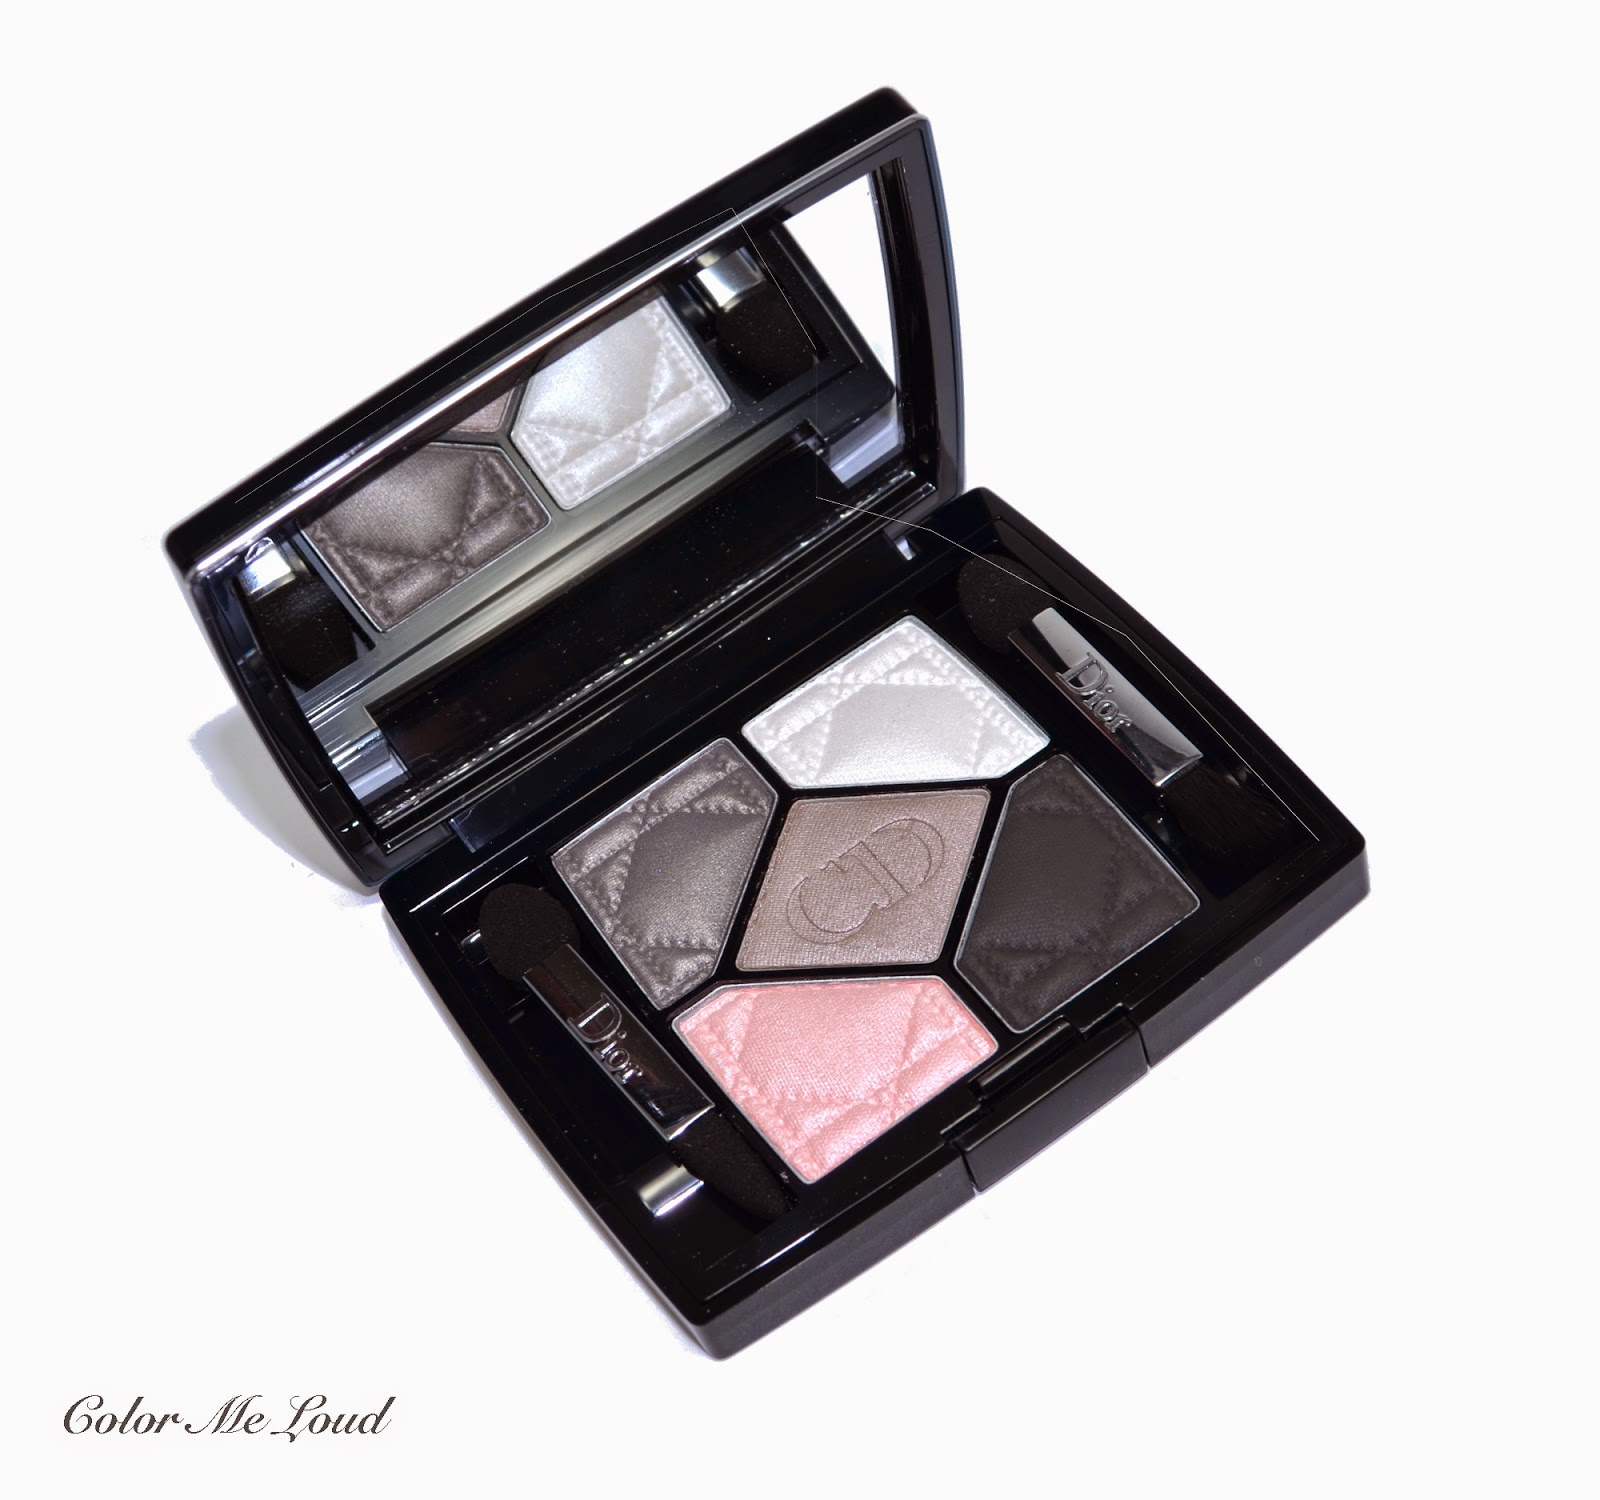 Dior 5 Couleurs Eyeshadow Palette #056 Bar from Fall 2014 Collection, Swatch, Review & FOTD